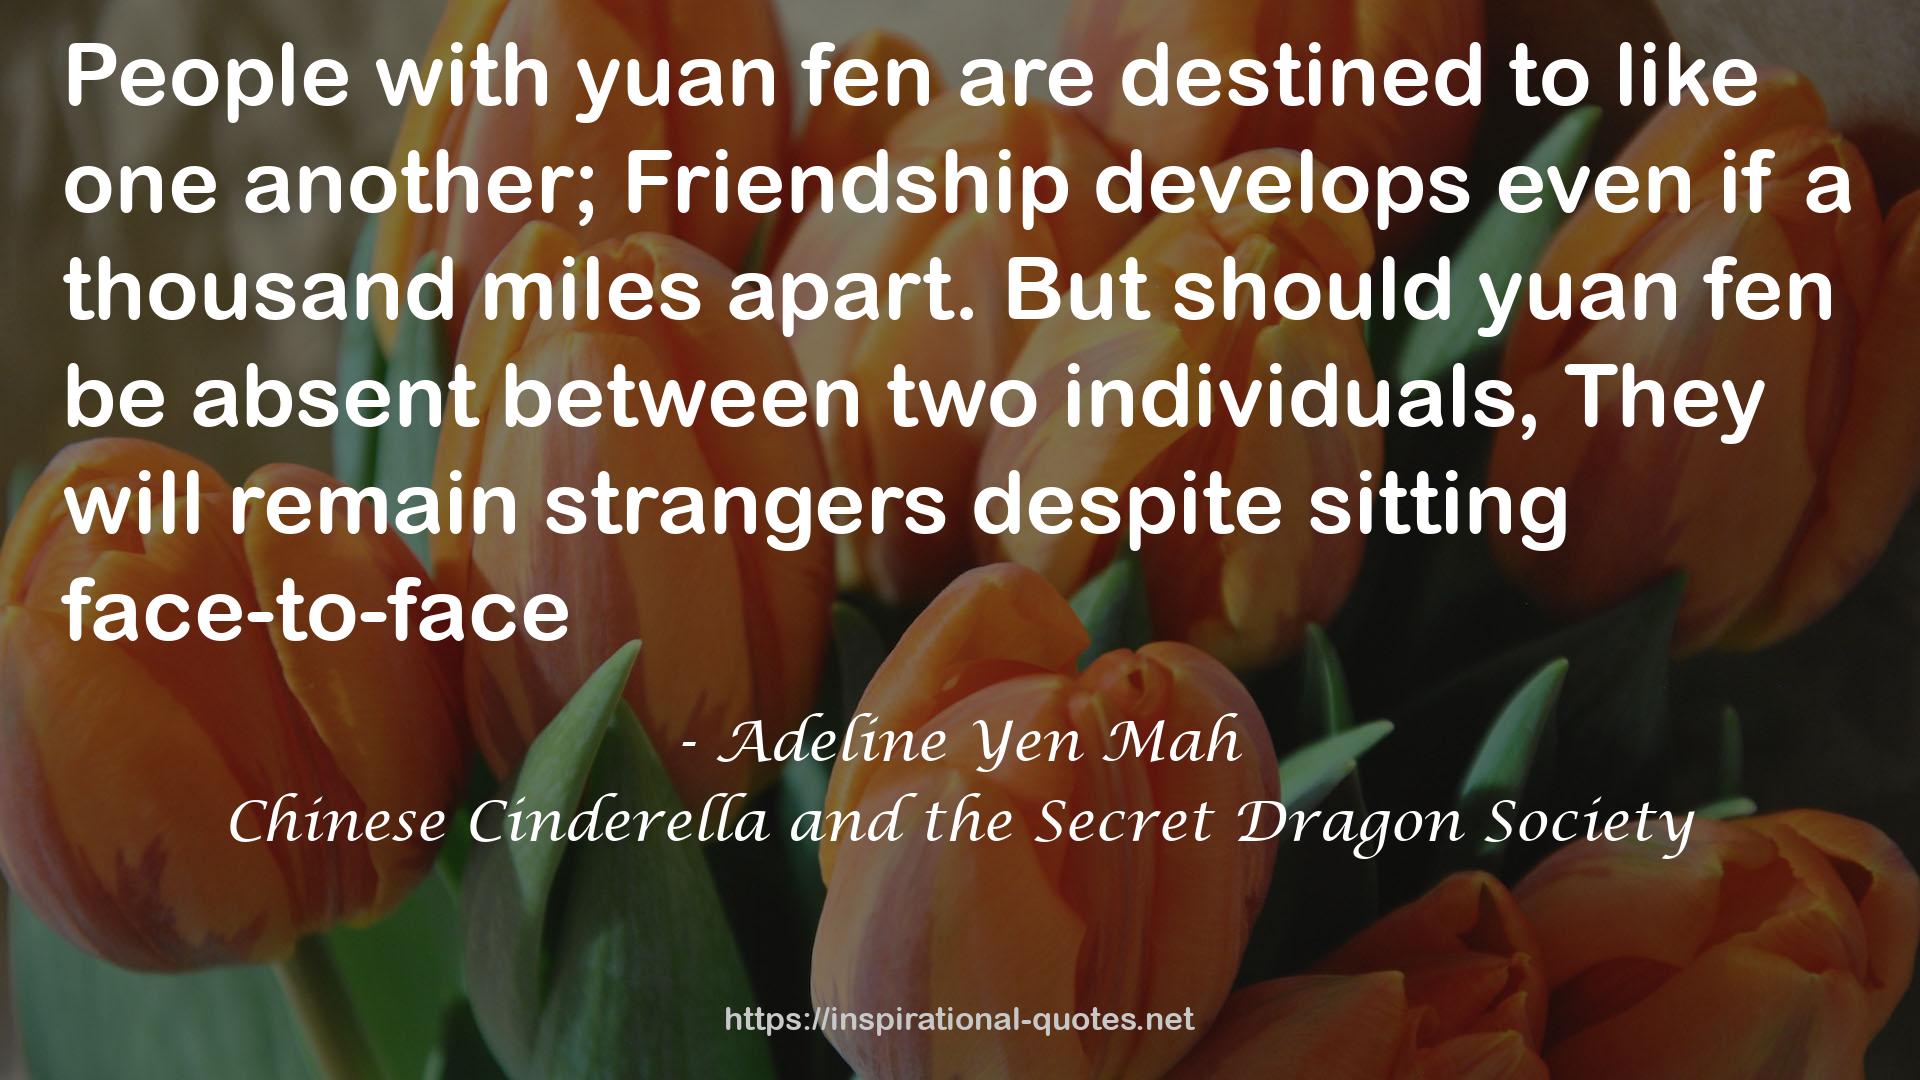 Chinese Cinderella and the Secret Dragon Society QUOTES